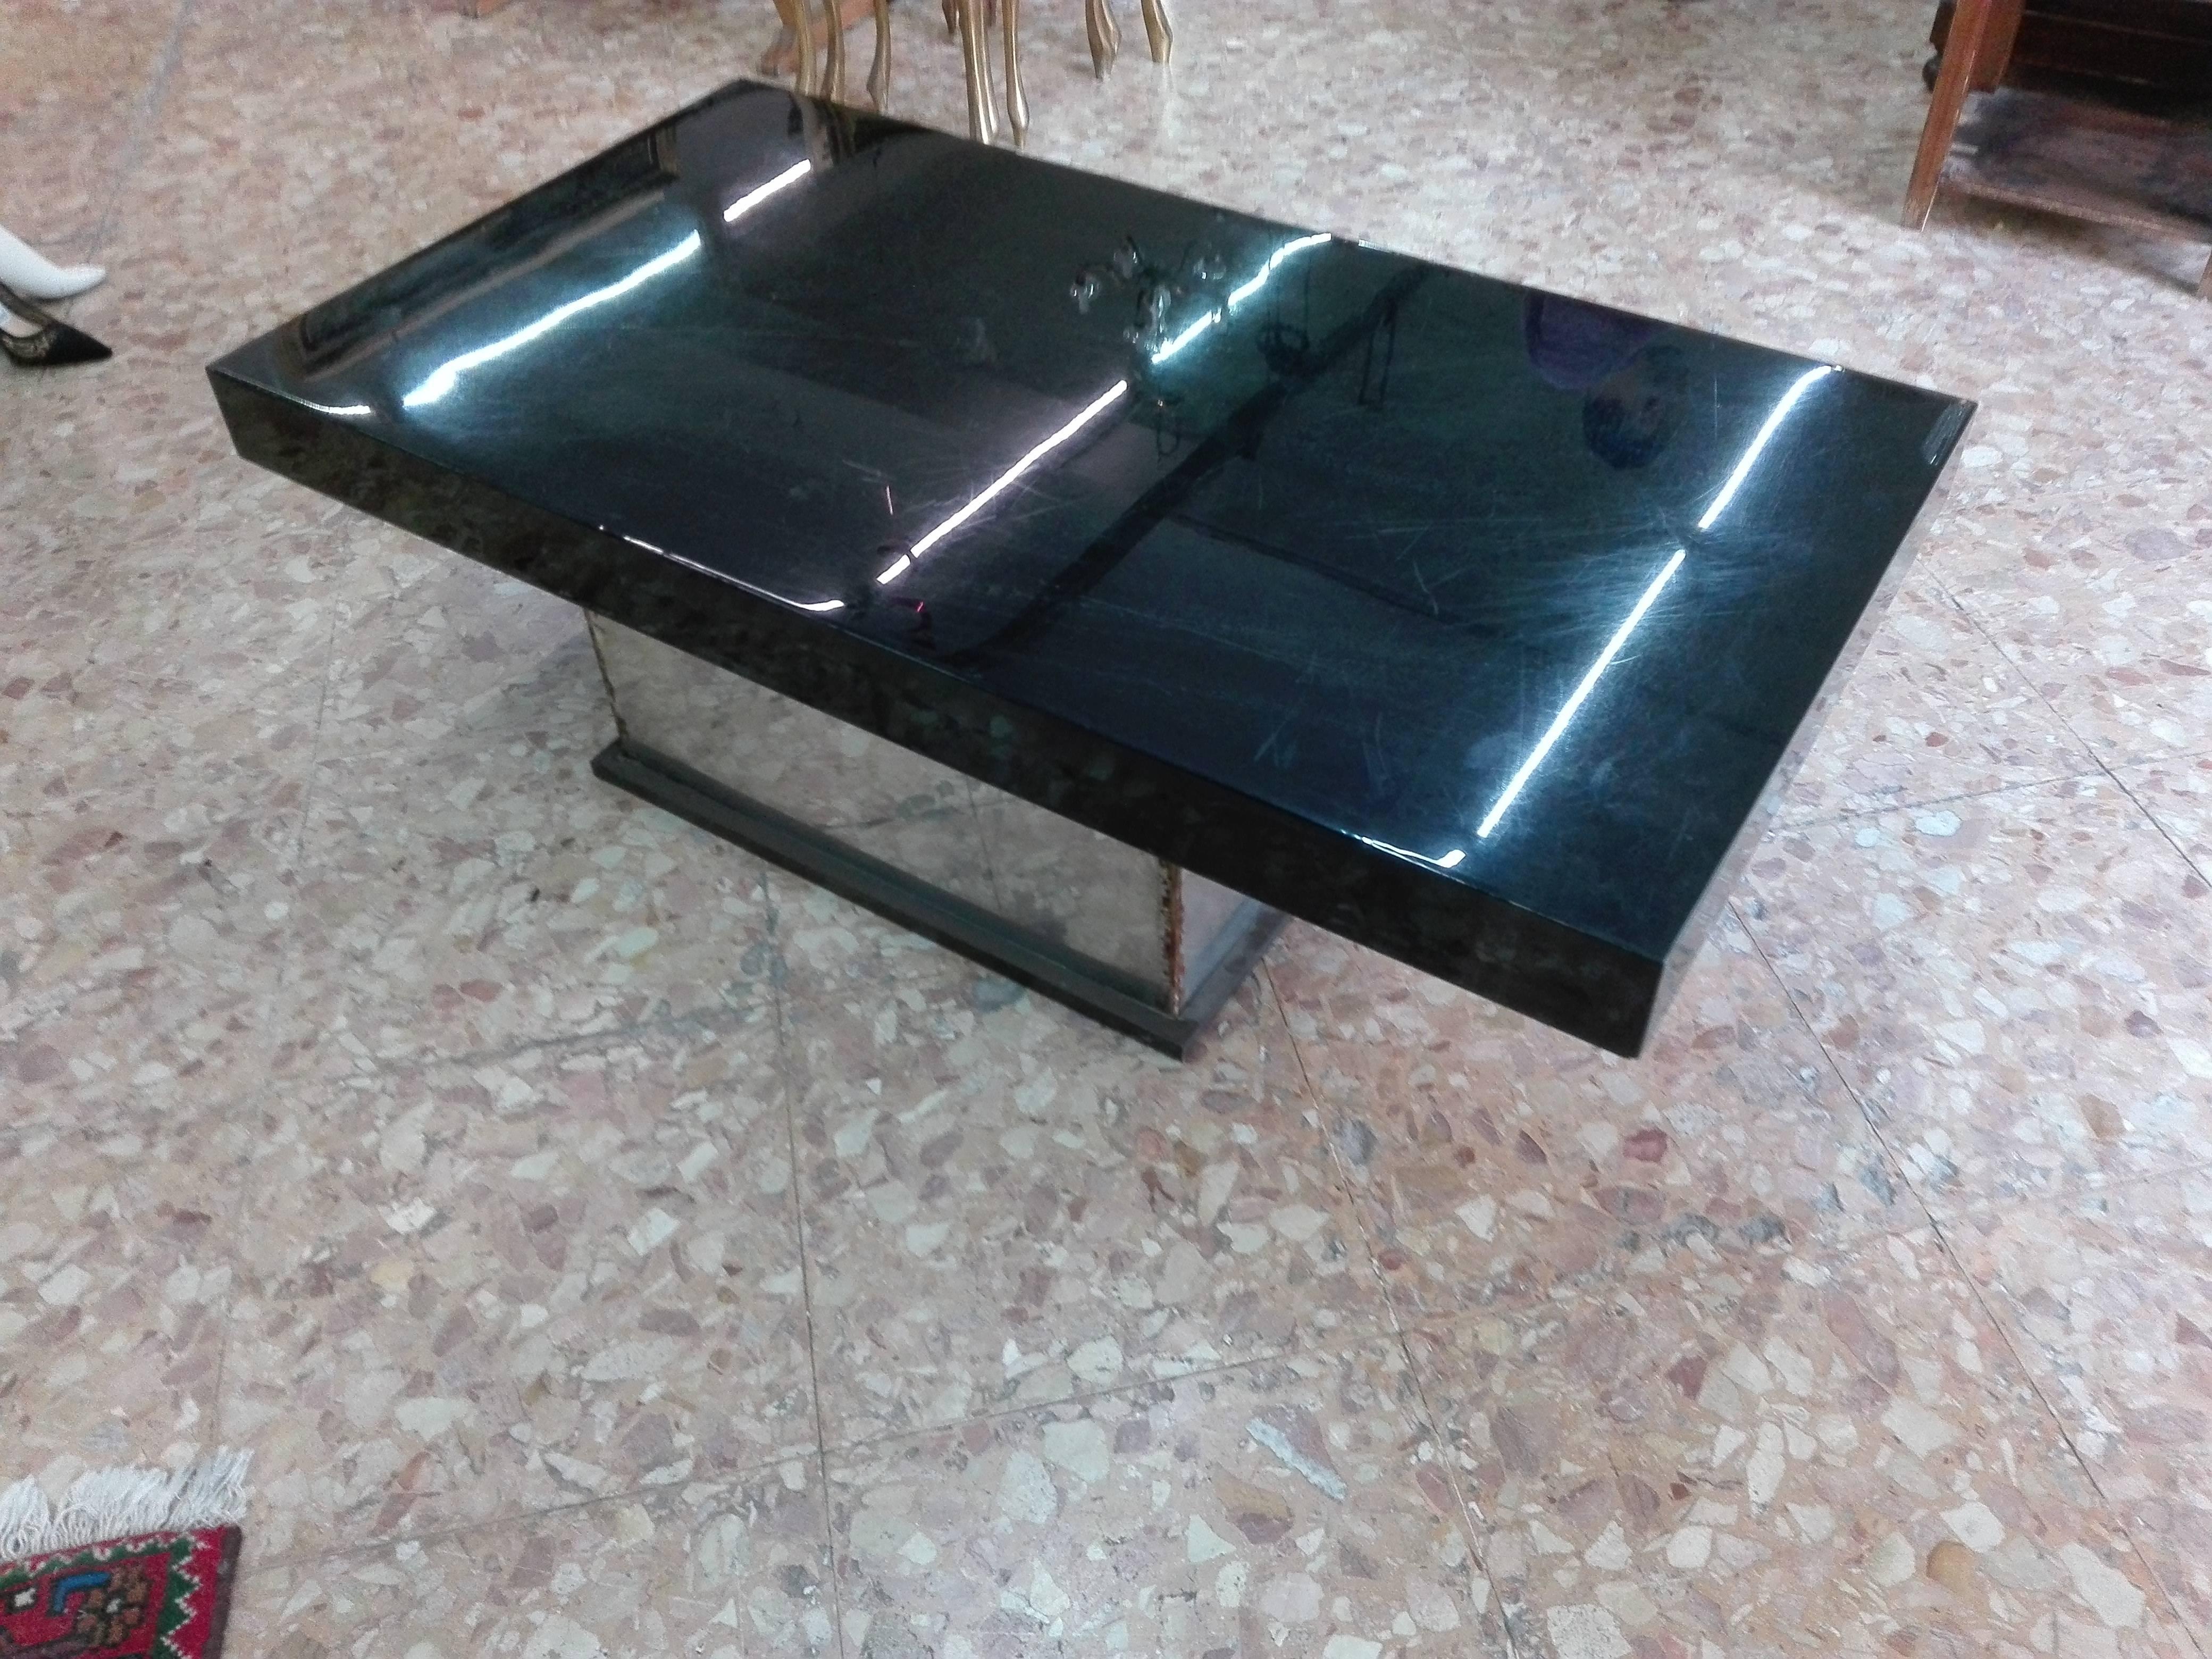 Coffee table designed by Willy Rizzo and produced in the 1960s and 1970s. It is made of coated and lacquered black steel.